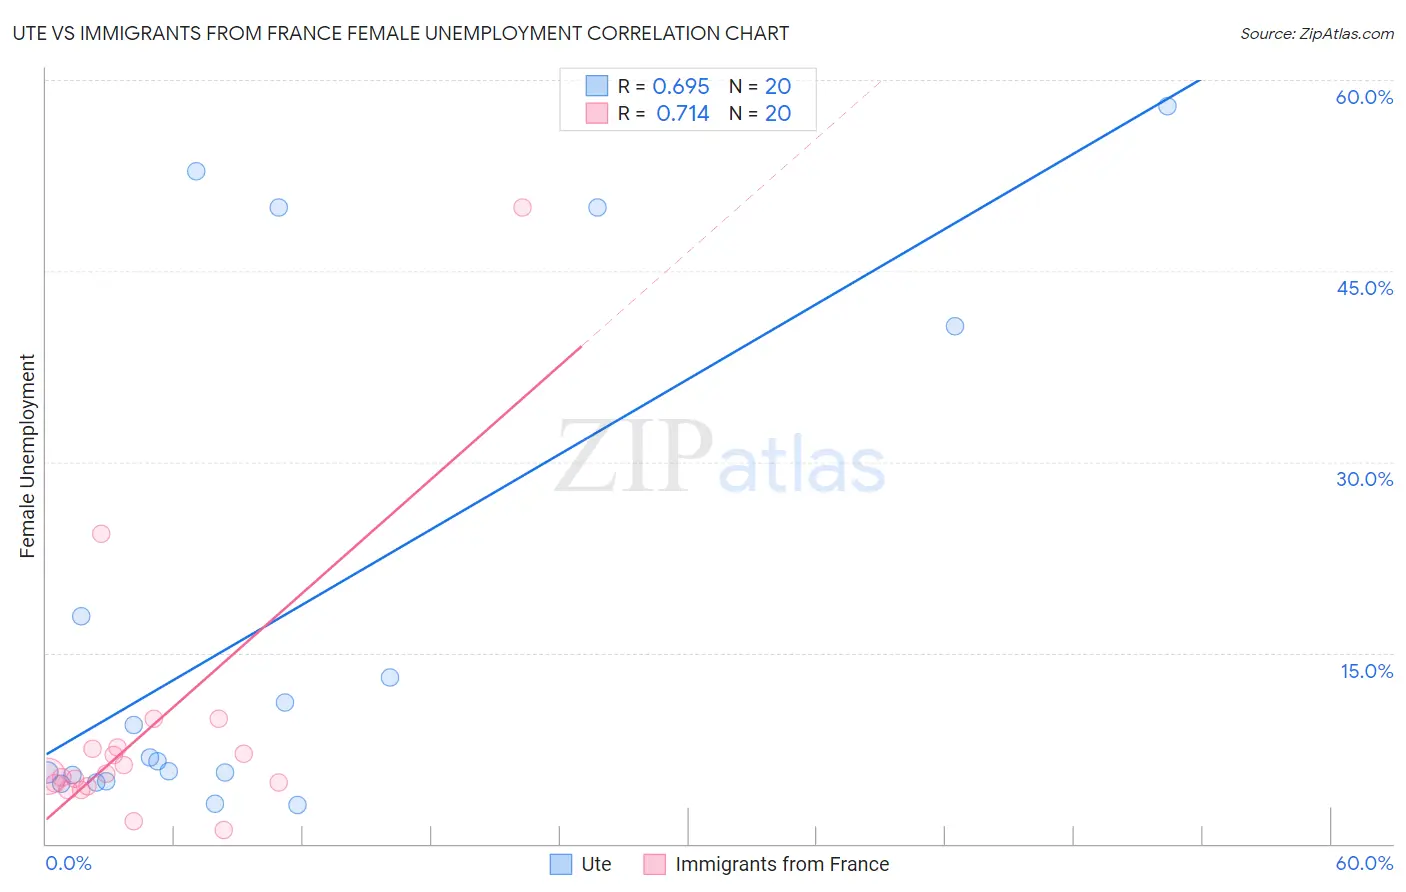 Ute vs Immigrants from France Female Unemployment